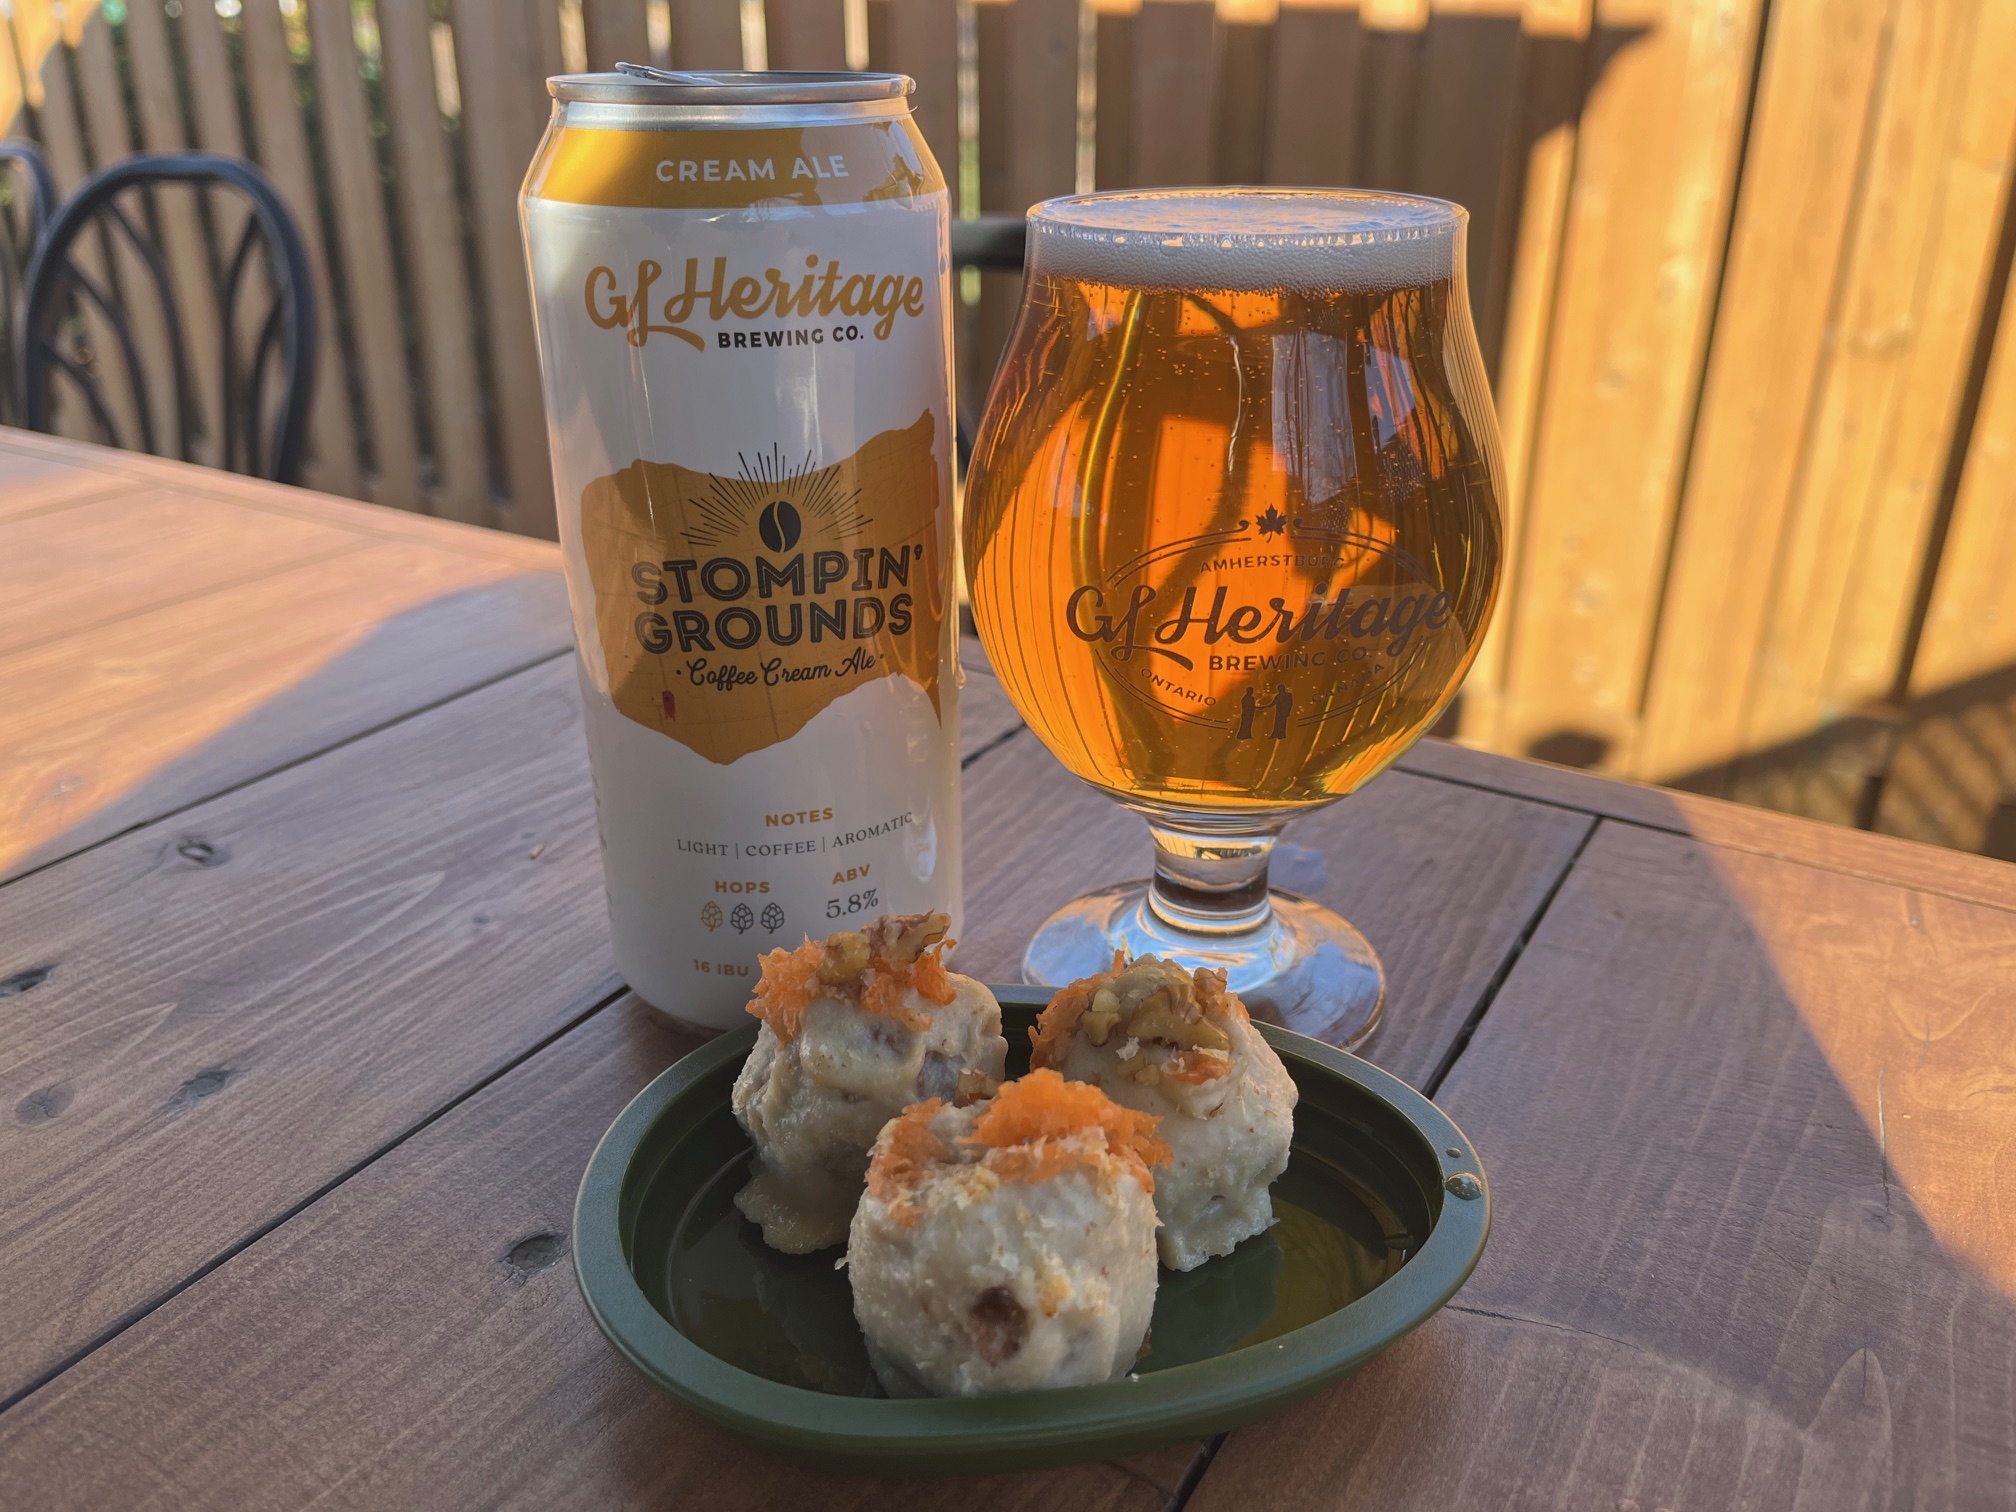 Featured image for “GL Heritage Brewing Co’s Stompin’ Grounds Coffee Cream Ale with Carrot Cake Truffles.”